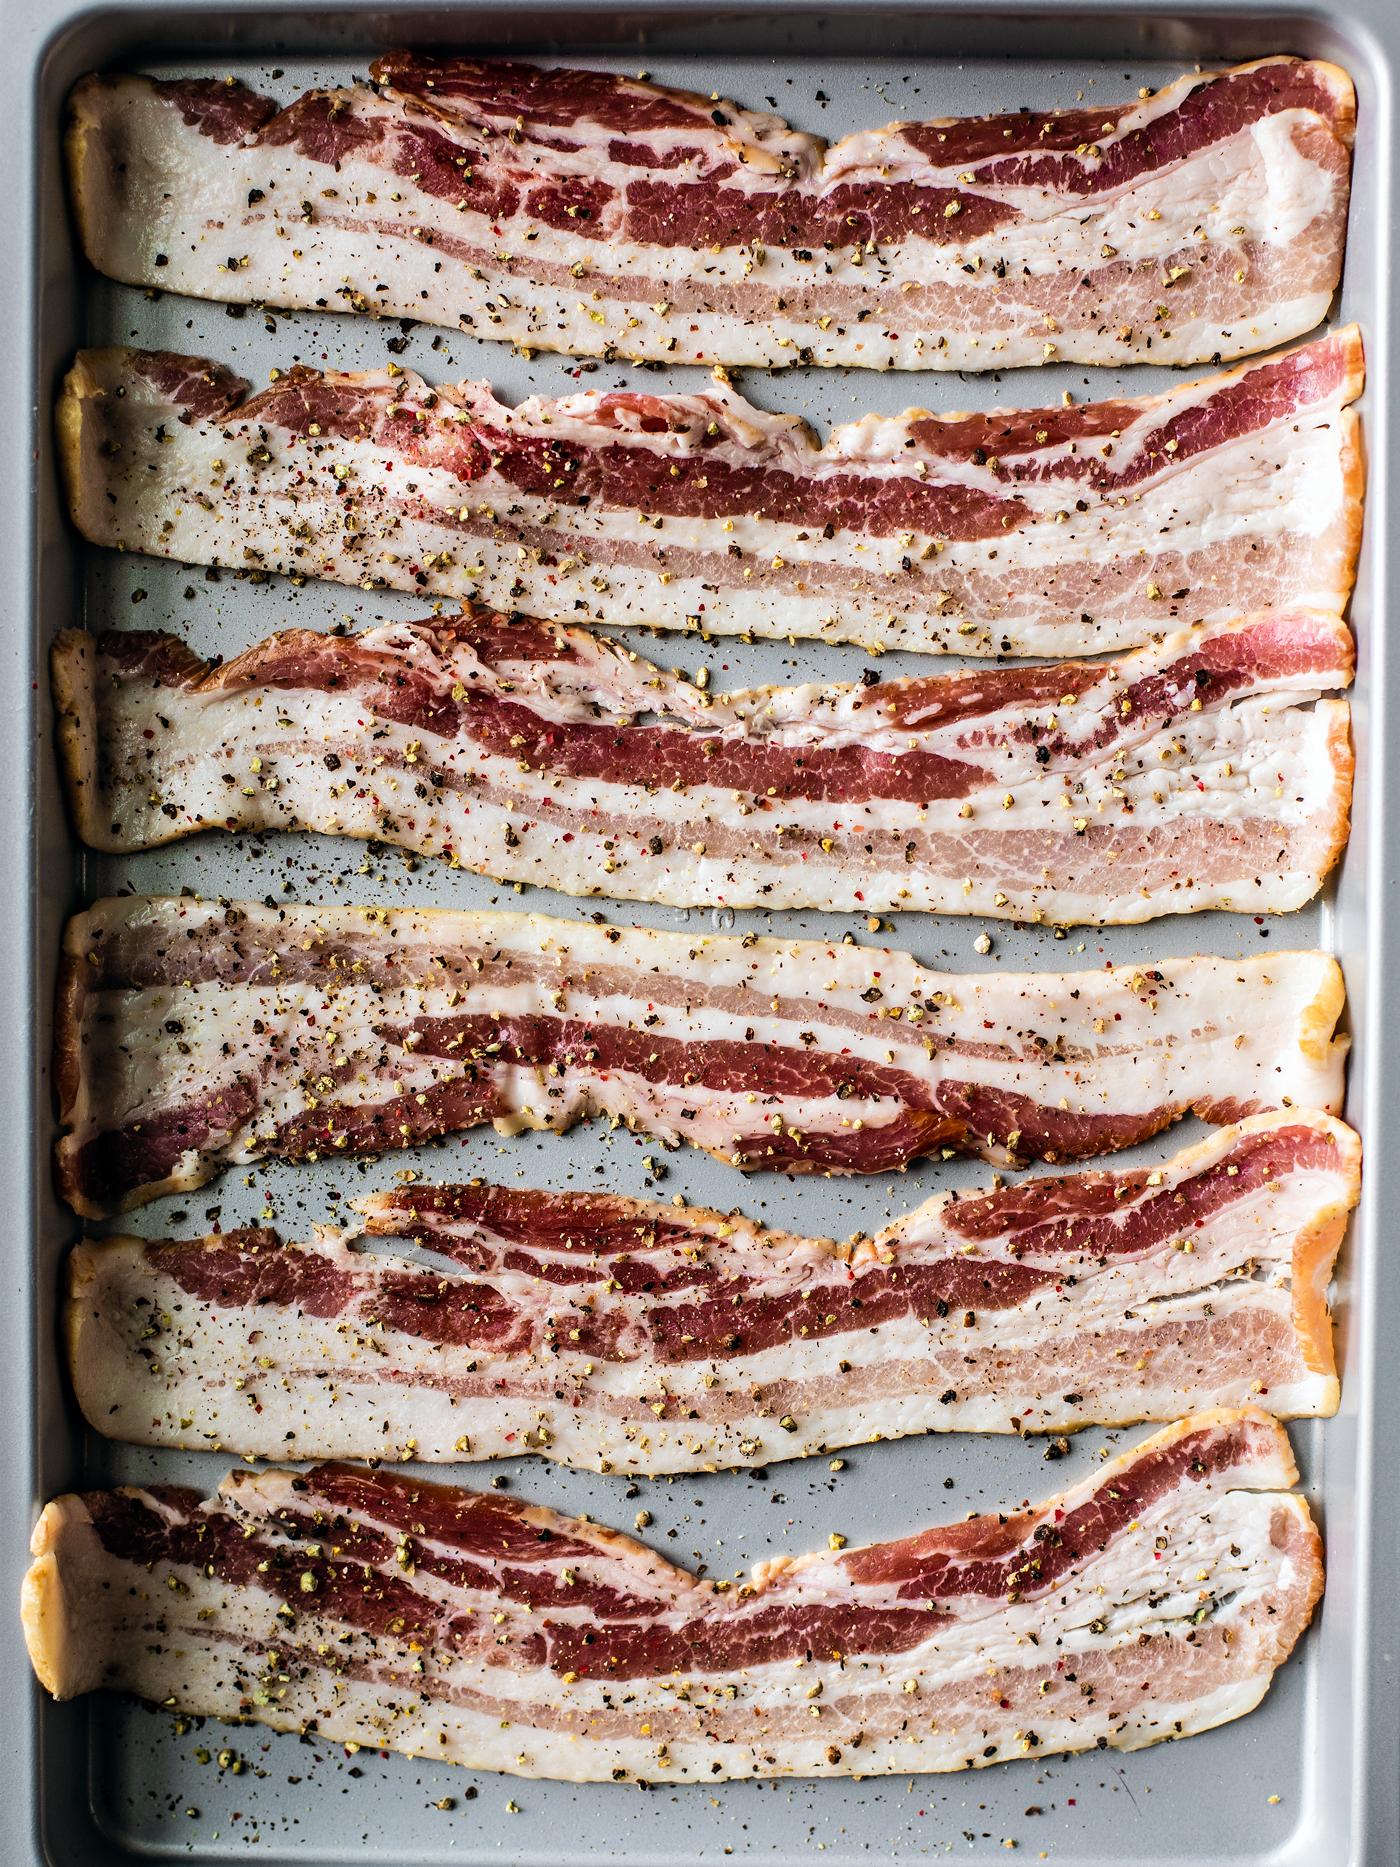 Baking sheet of uncooked bacon with cracked black pepper.